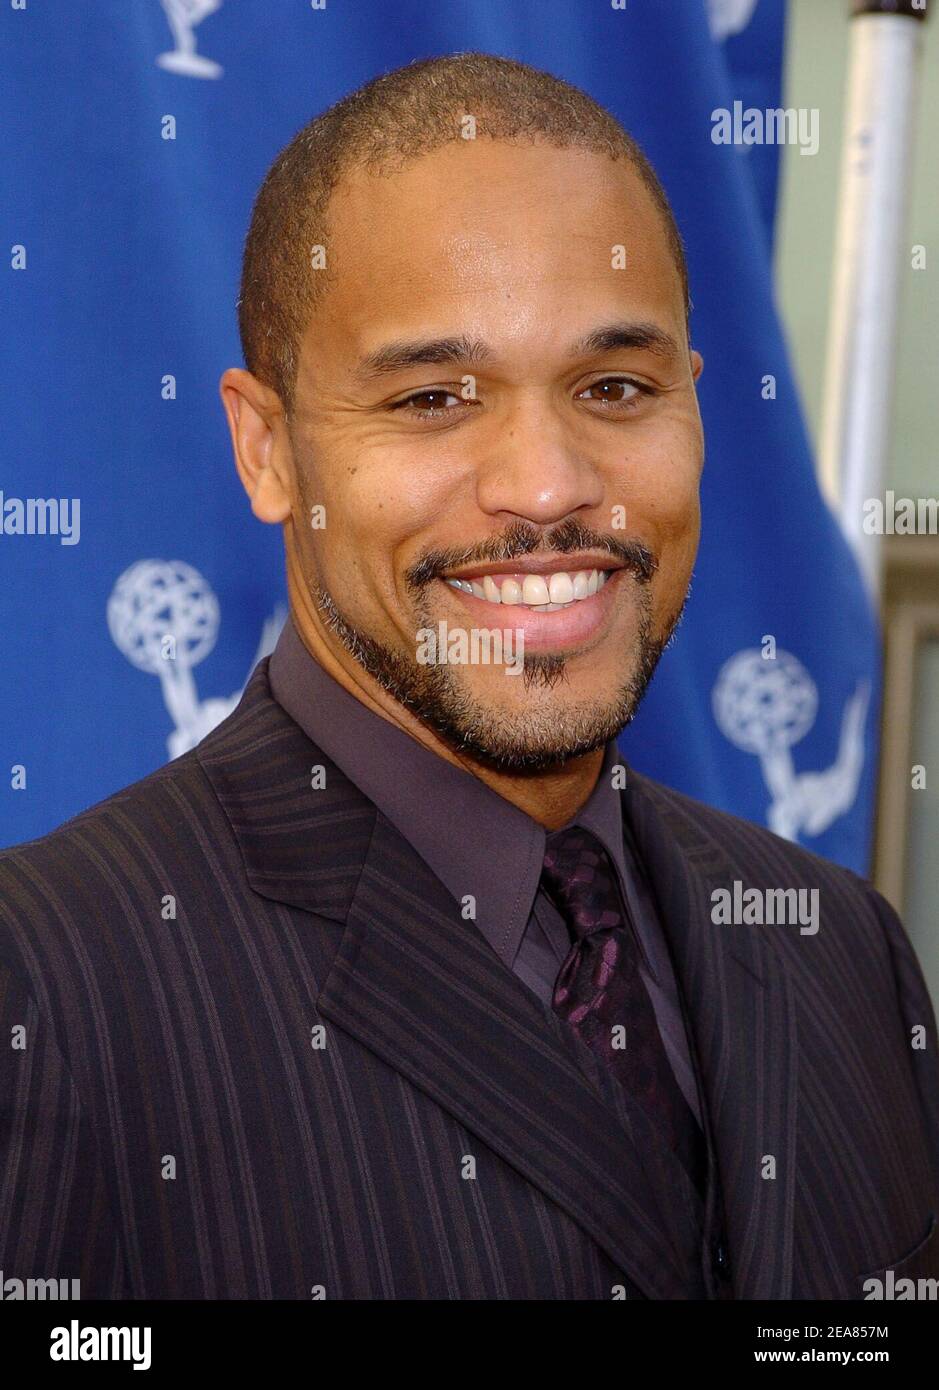 Keith Hamilton Cobb arrives at the 31st Annual Daytime Emmy Awards Creative Arts presentation, held at the Hollywood & Highland Grand Ballroom, in Los Angeles, on Saturday, May 15, 2004. (Pictured : Keith Hamilton Cobb). Photo by Nicolas Khayat/ABACA. Stock Photo